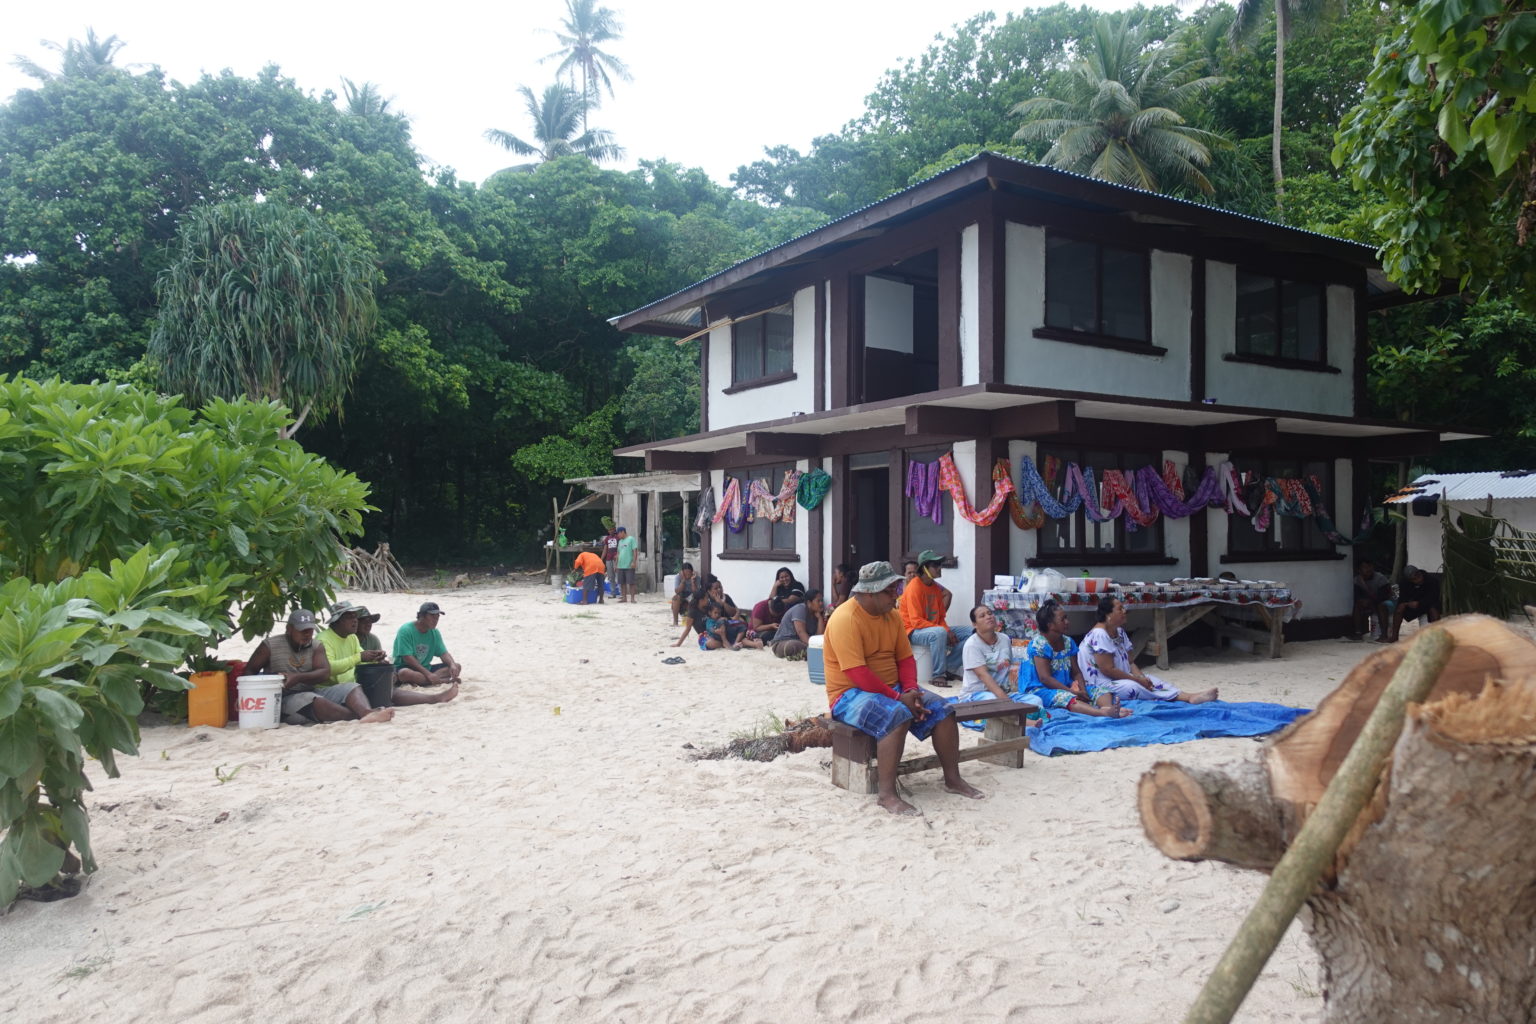 Pacific islanders sit on benches in front ofuilding on beach